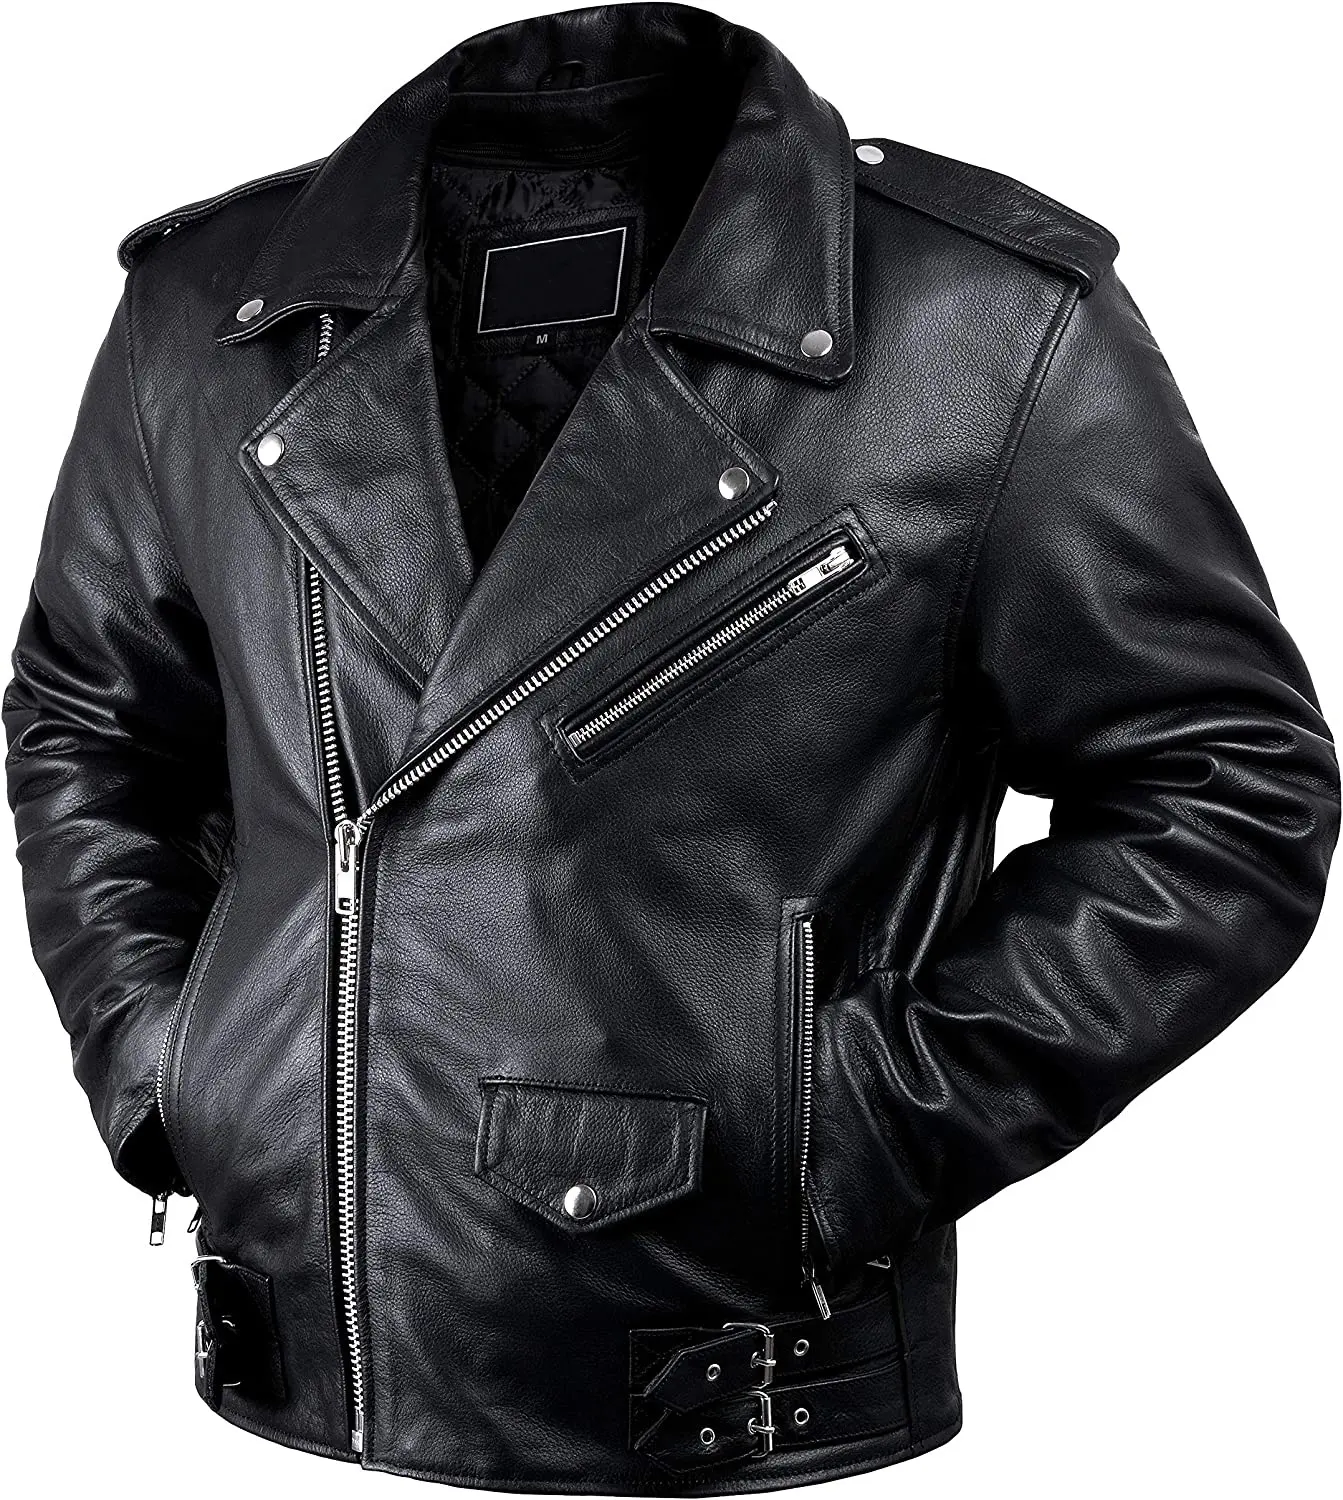 New arrival Leather Motorcycle Jacket For Men Riding Racing Biker Genuine Leather Motorbike Jackets